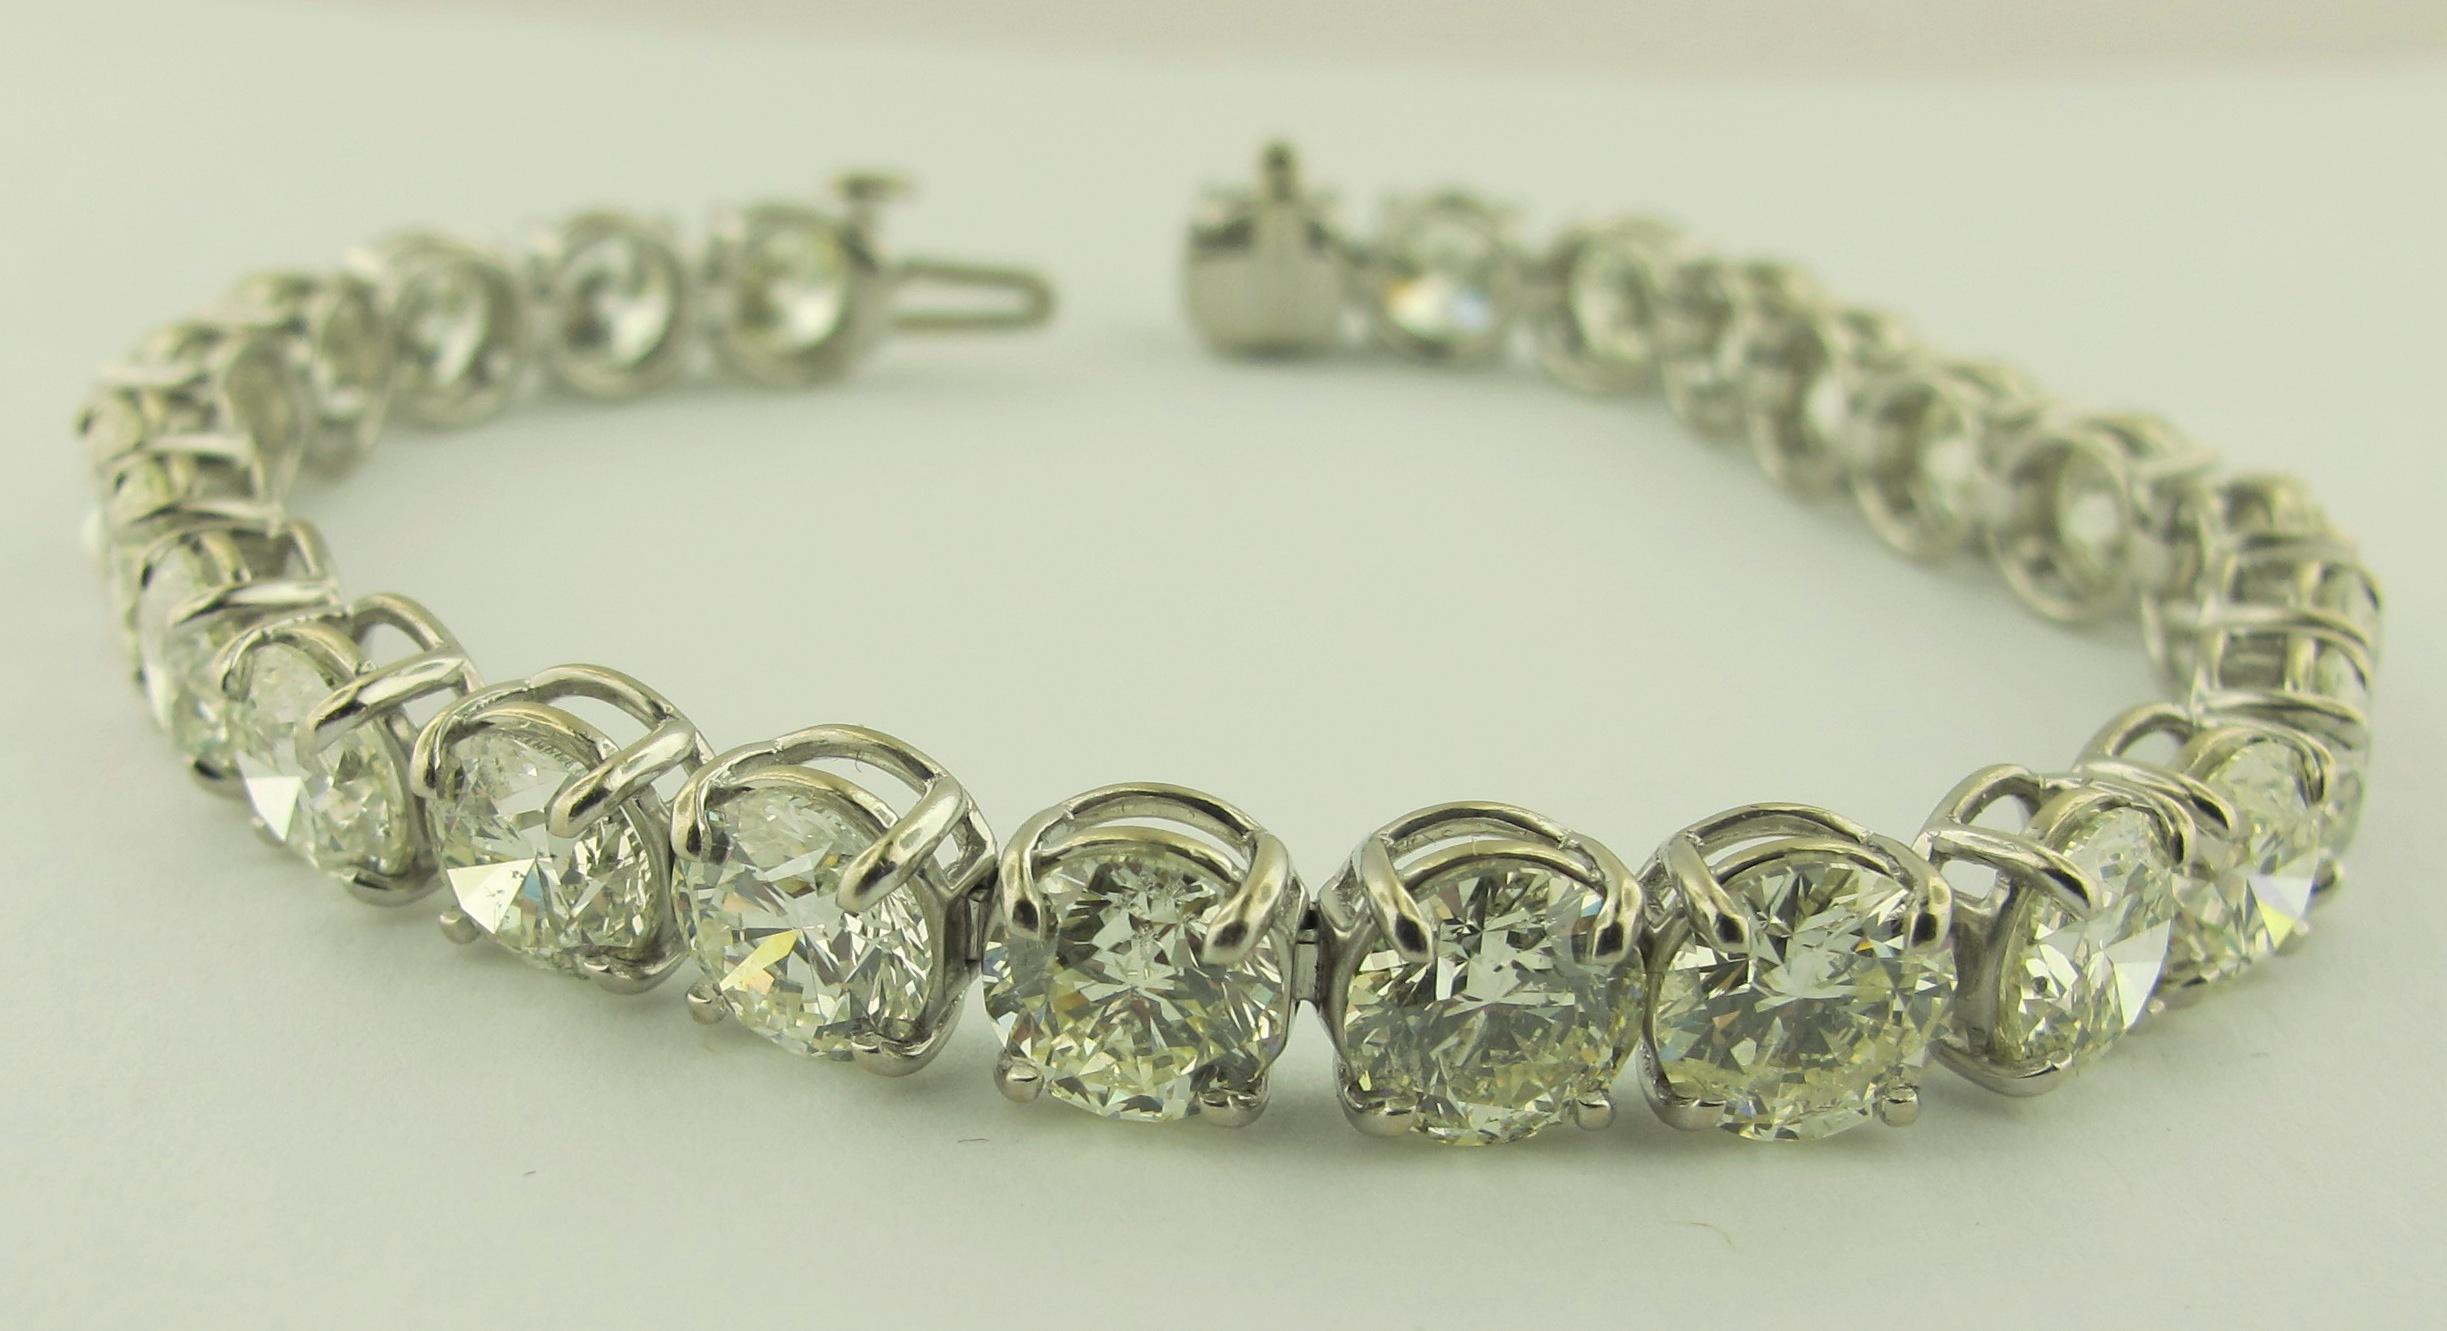 Straight-line Diamond bracelet with 26 round brilliant cut diamonds with a total weight of 19.24 carats.  Color J-K, Clarity VS.  Set in Platinum.